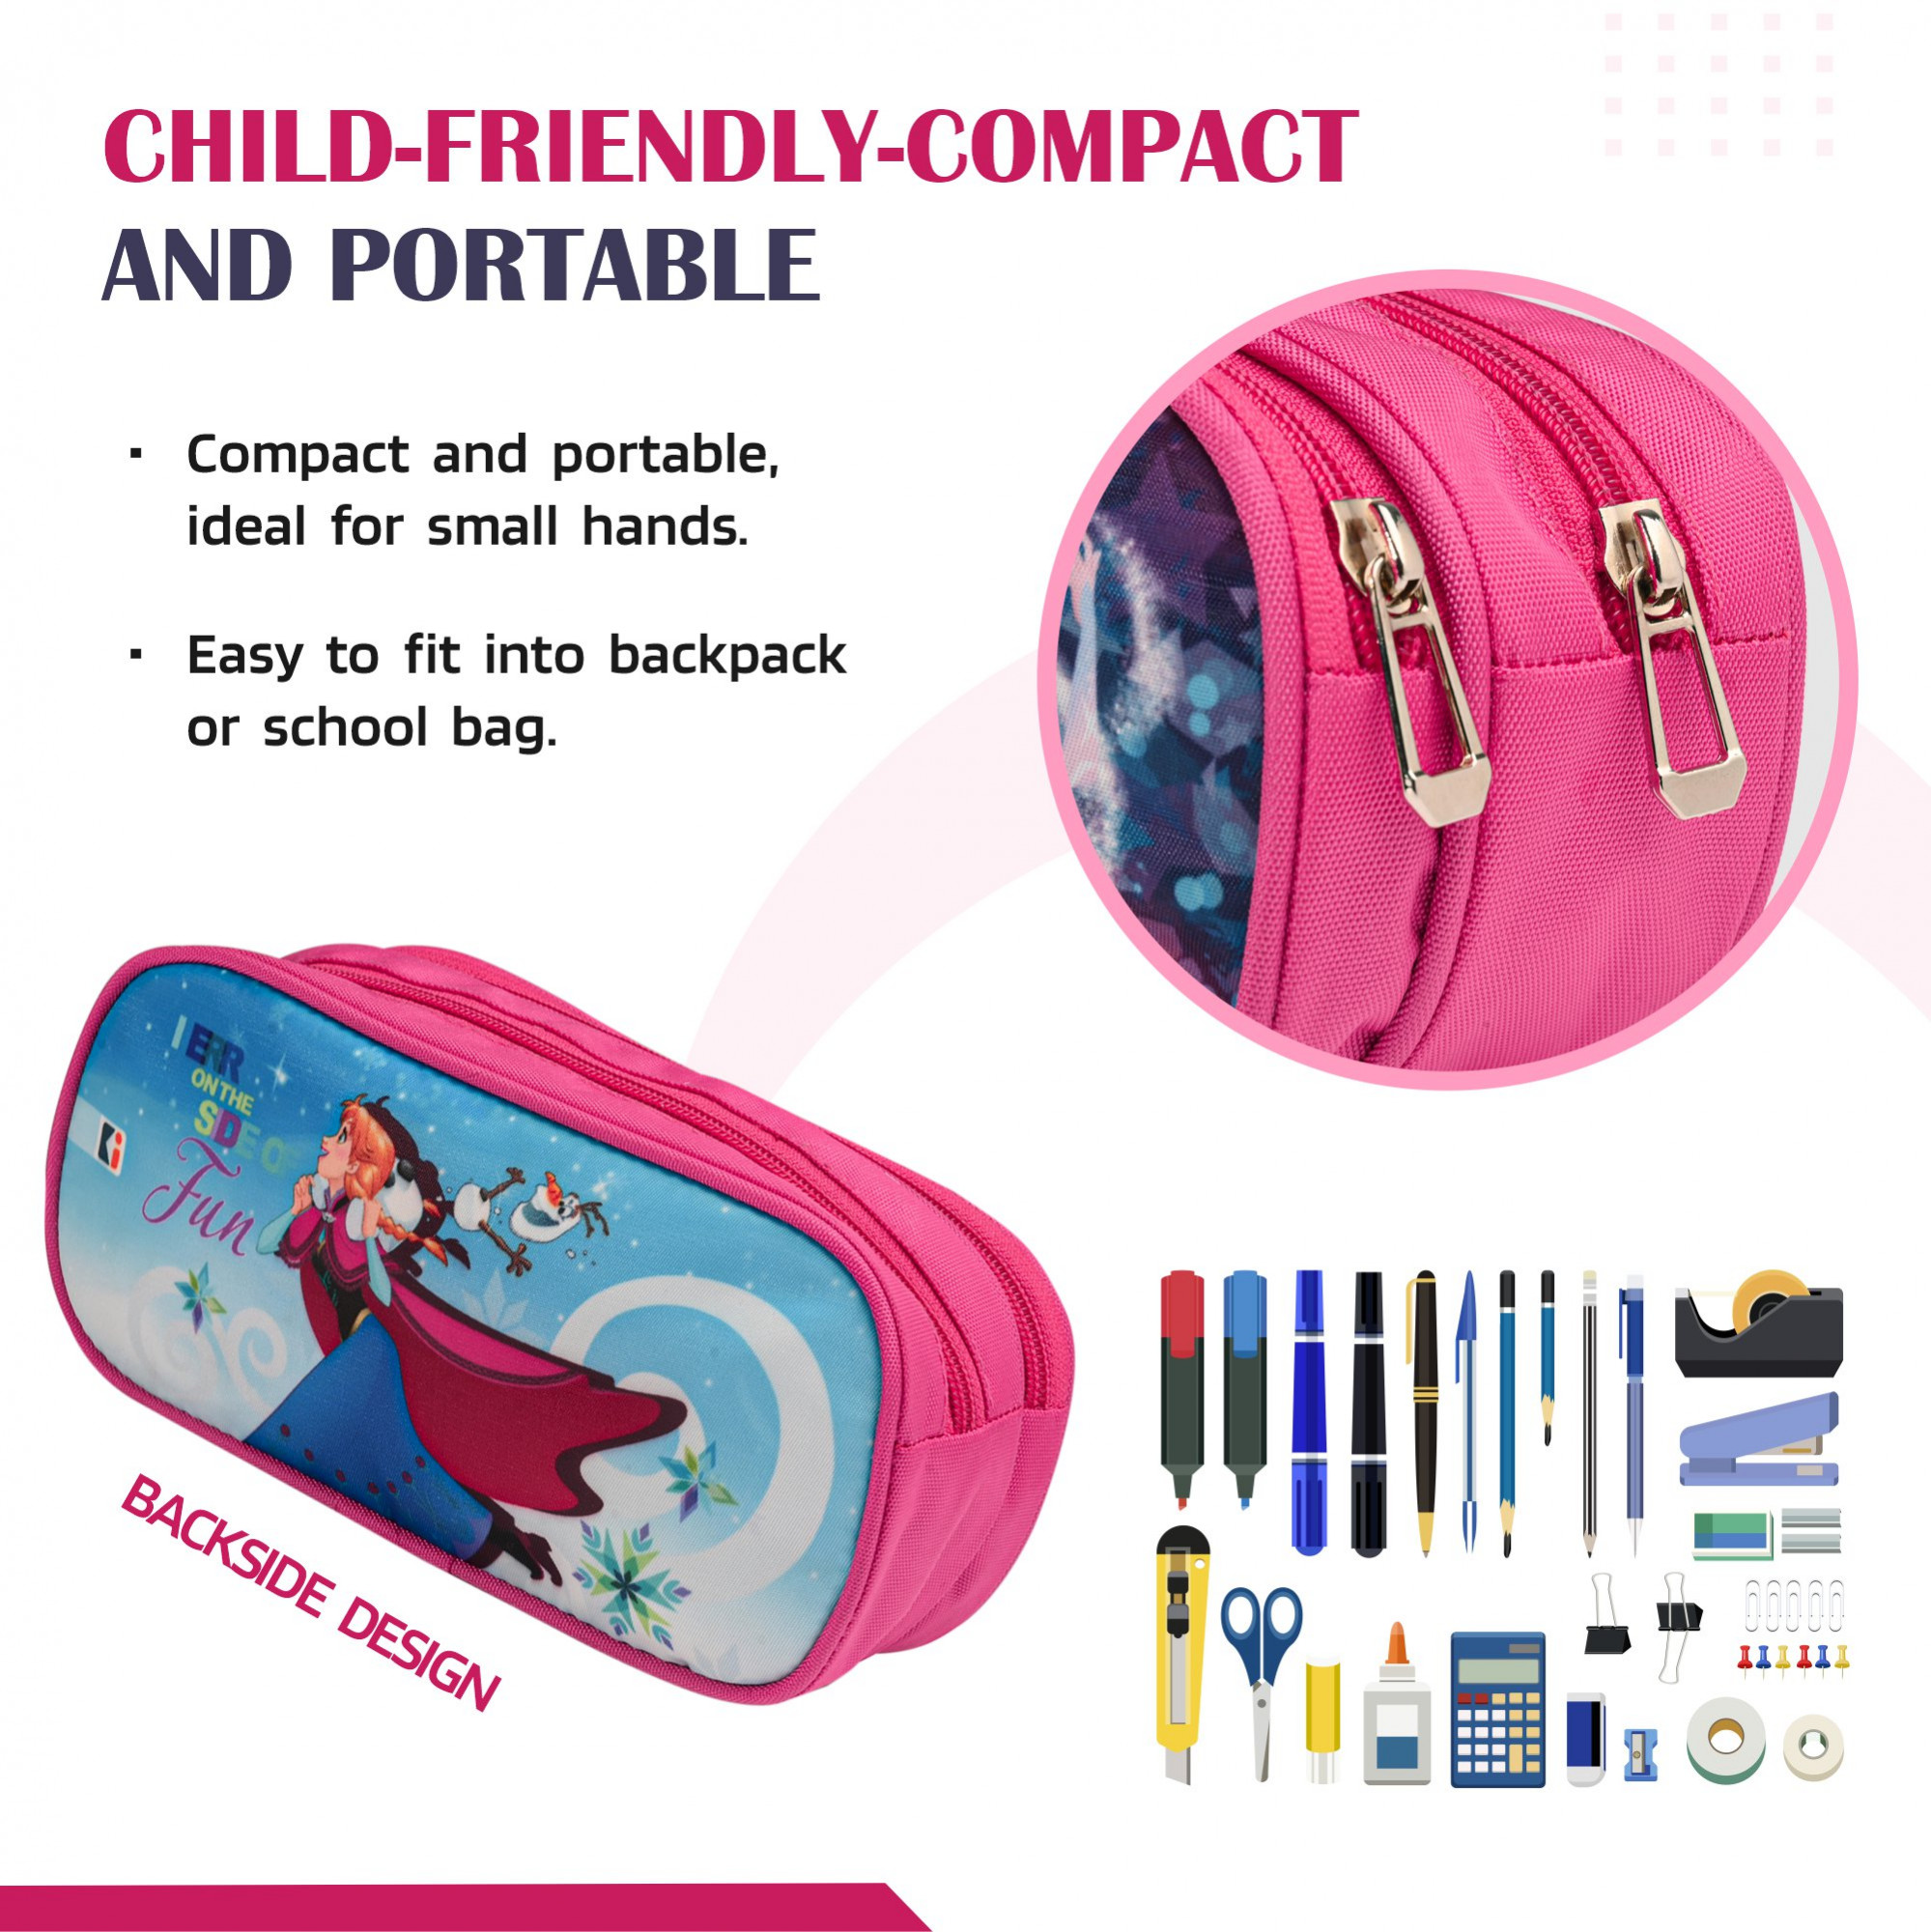 Kuber Industries Pencil Pouch | Multi-Purpose Travel Pouch | 2 Compartments Utility Pouch | Waterproof Stationary Bag | Geometry Box | Disney Frozen Fun | Blue & Pink